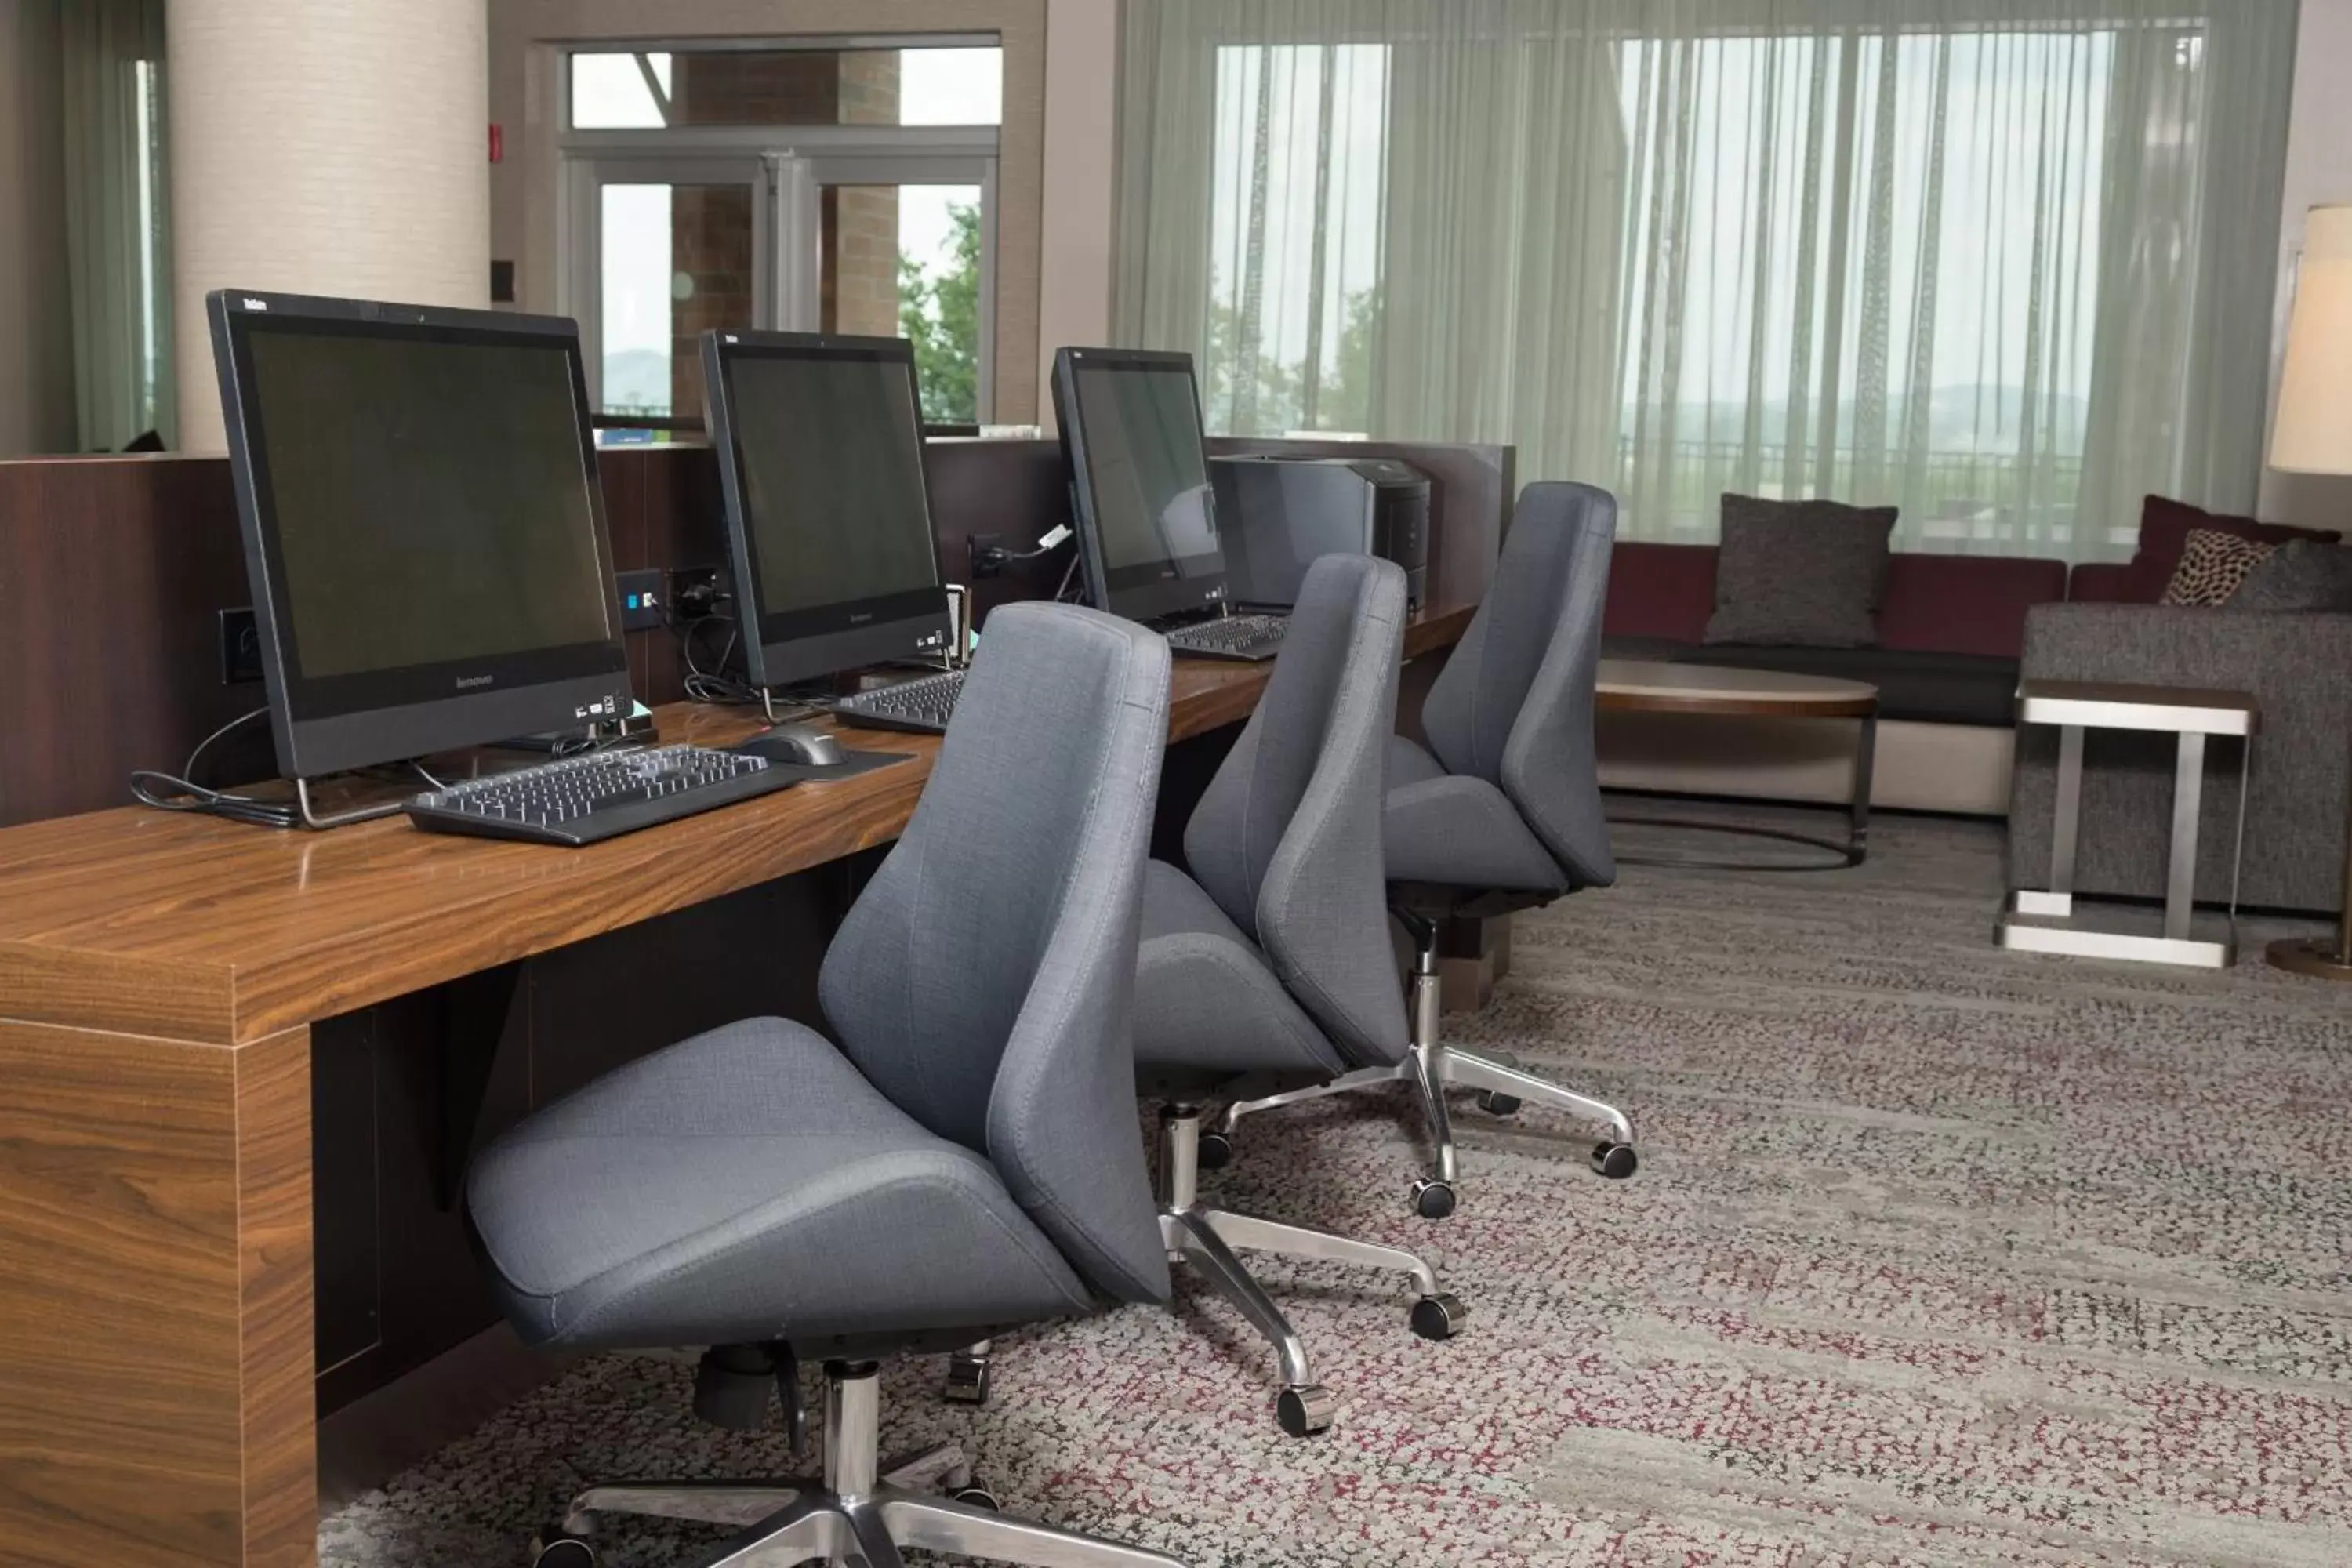 Business facilities in Courtyard by Marriott Morgantown